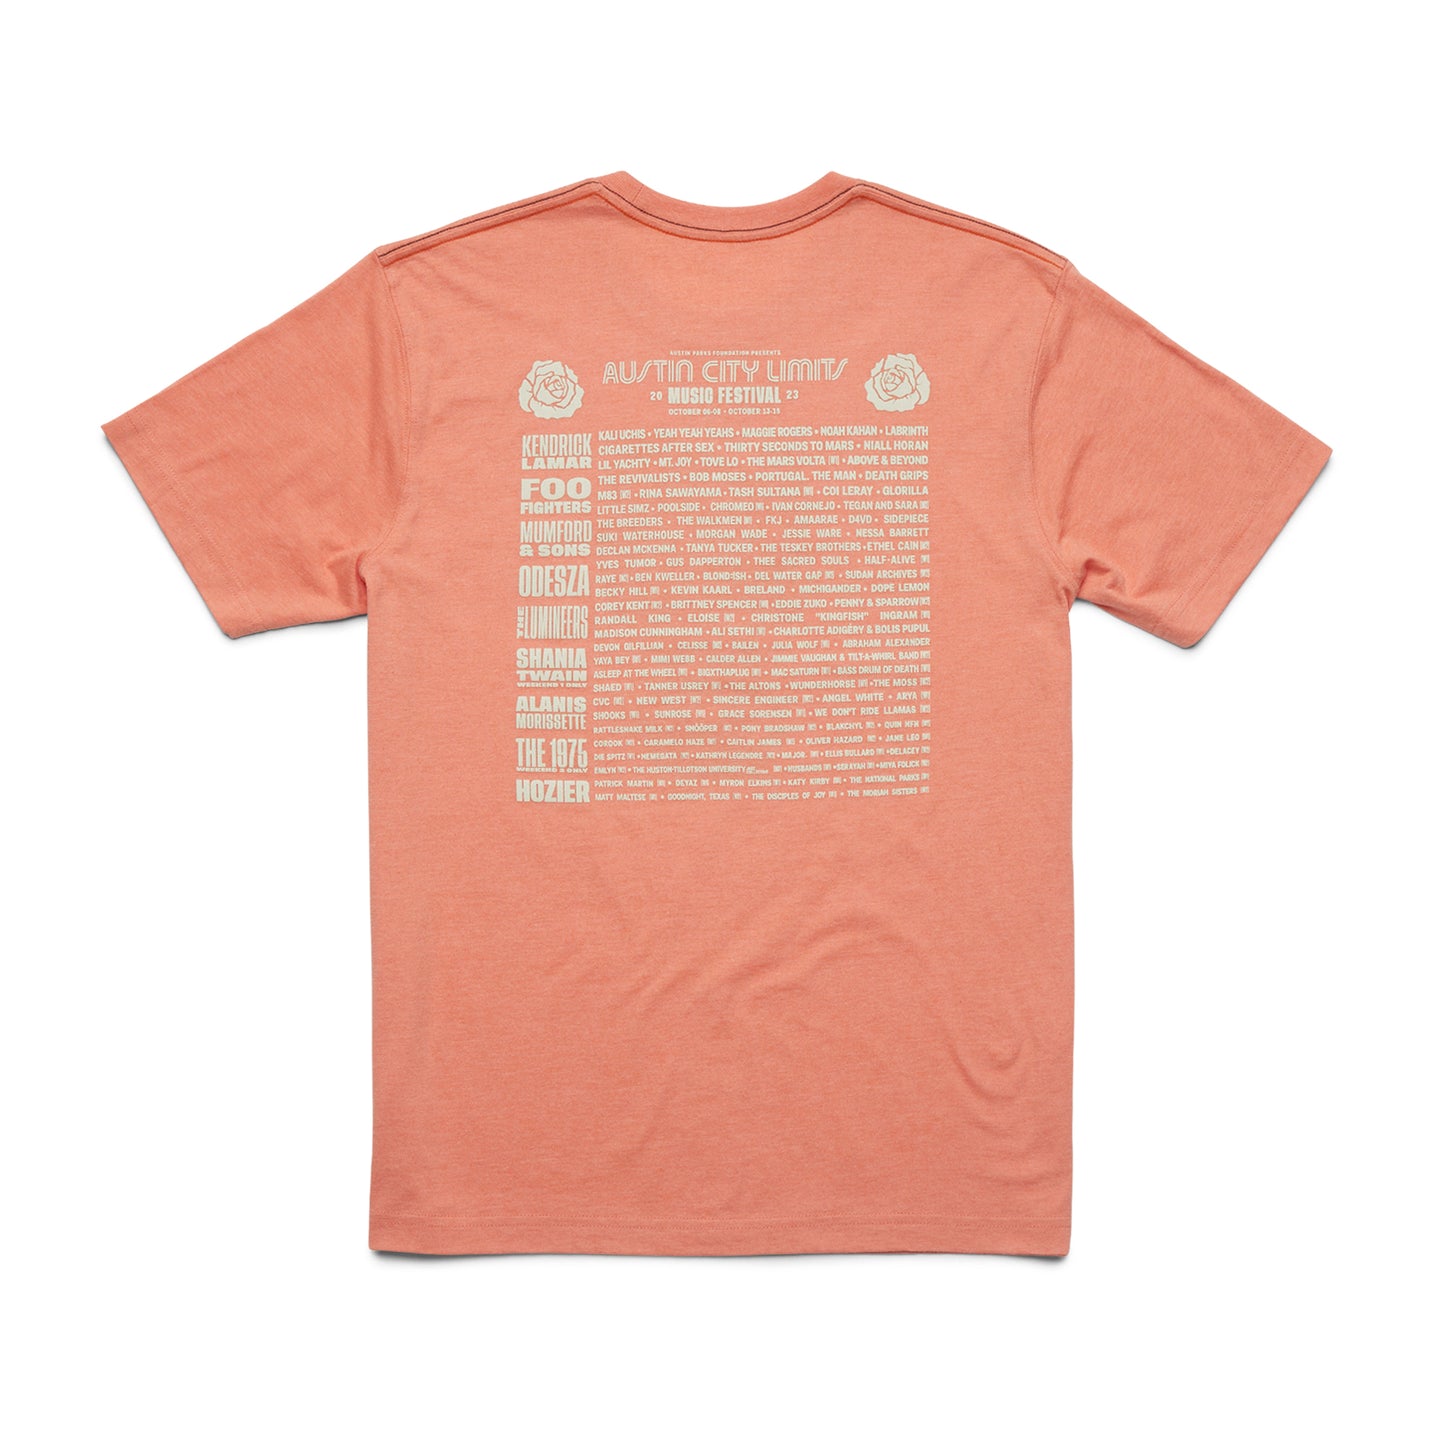 Howler Brothers x ACL Festival Lineup Tee